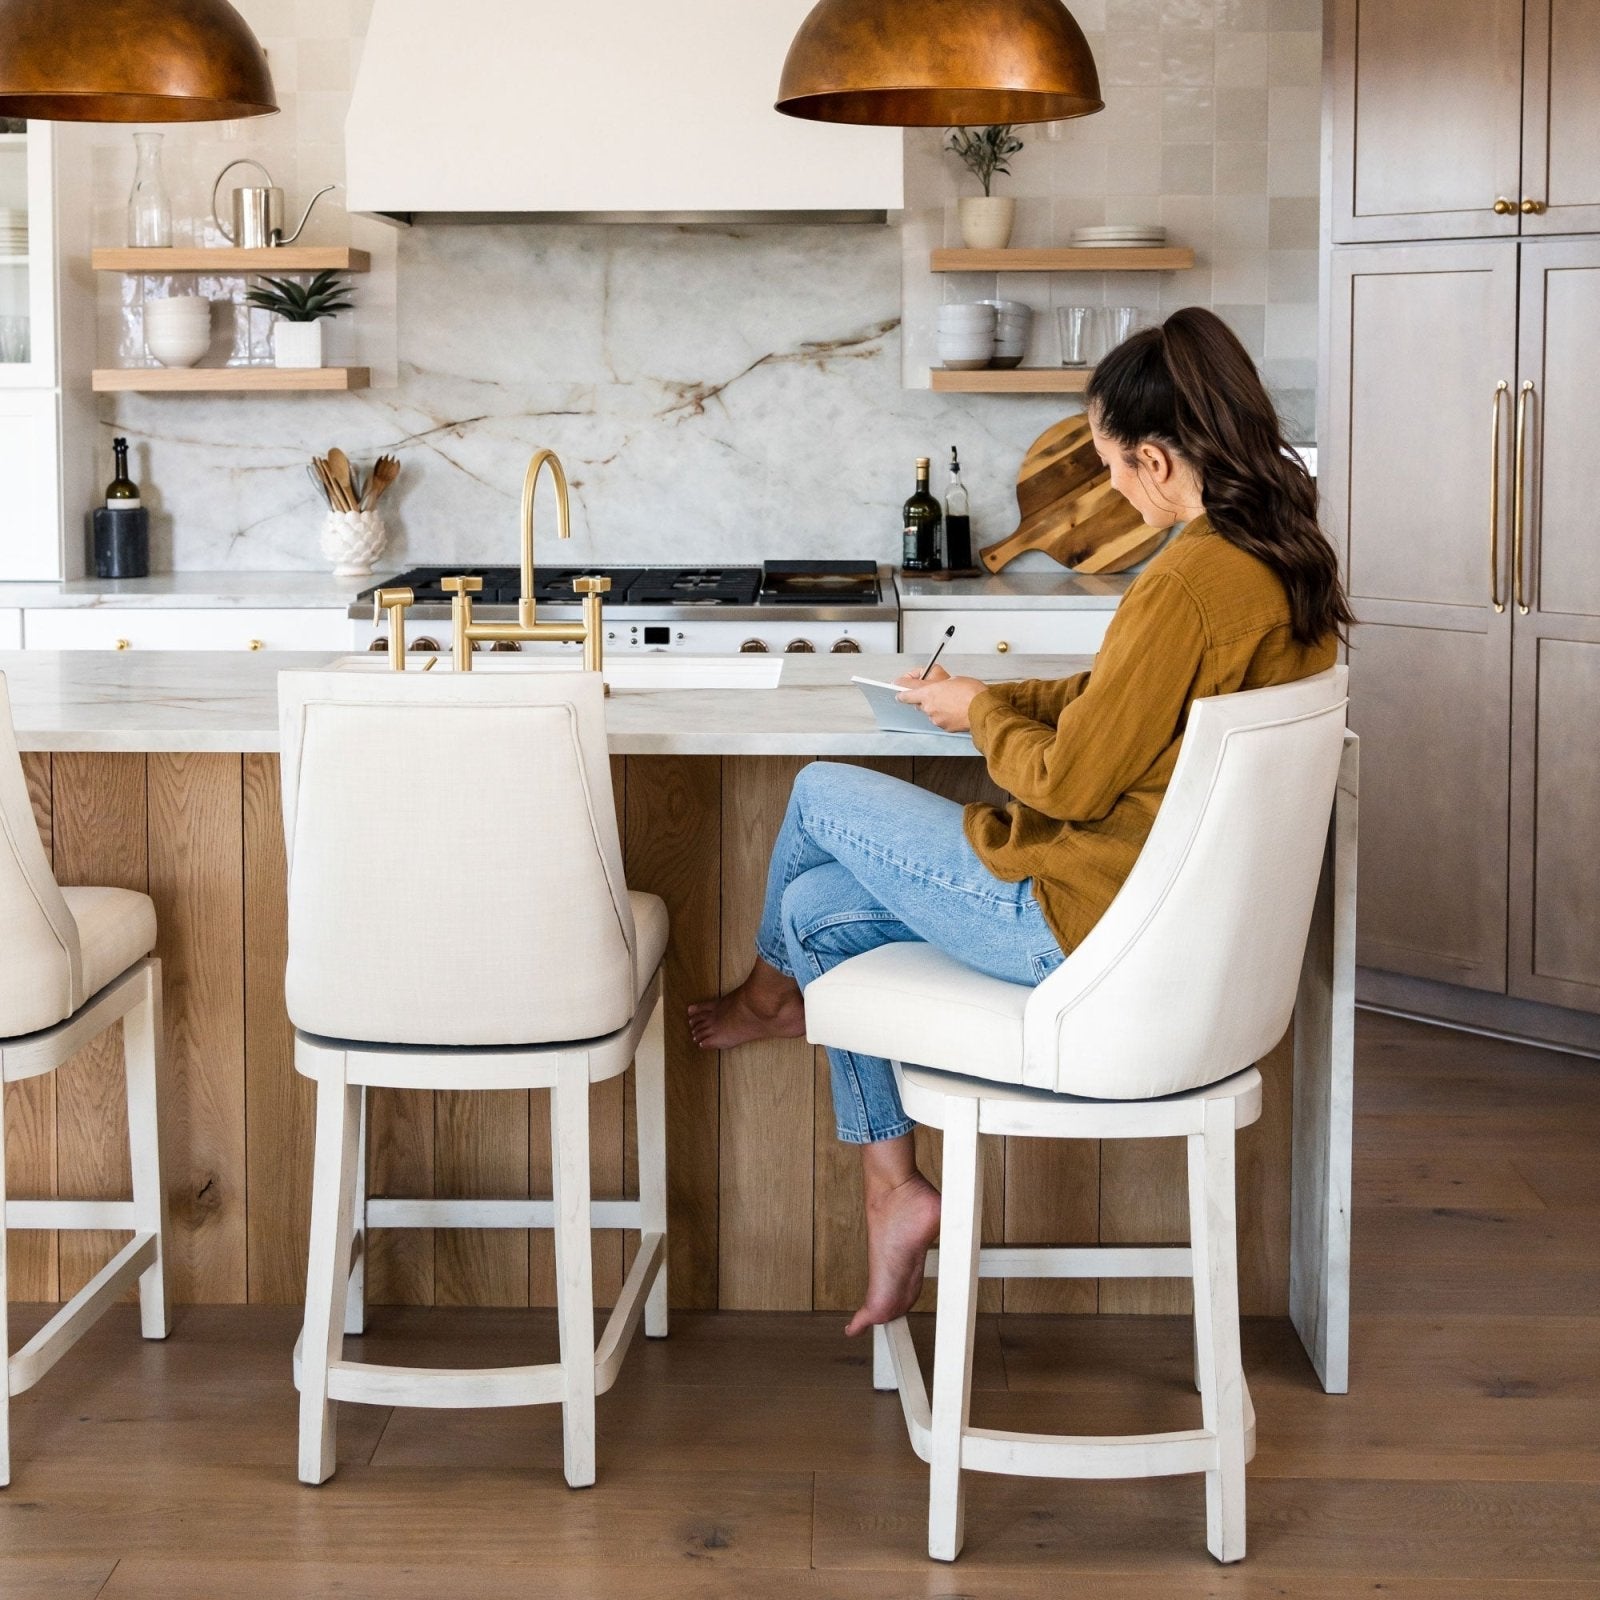 Vienna Bar Stool in White Oak Finish with Natural Fabric Upholstery in Stools by Maven Lane